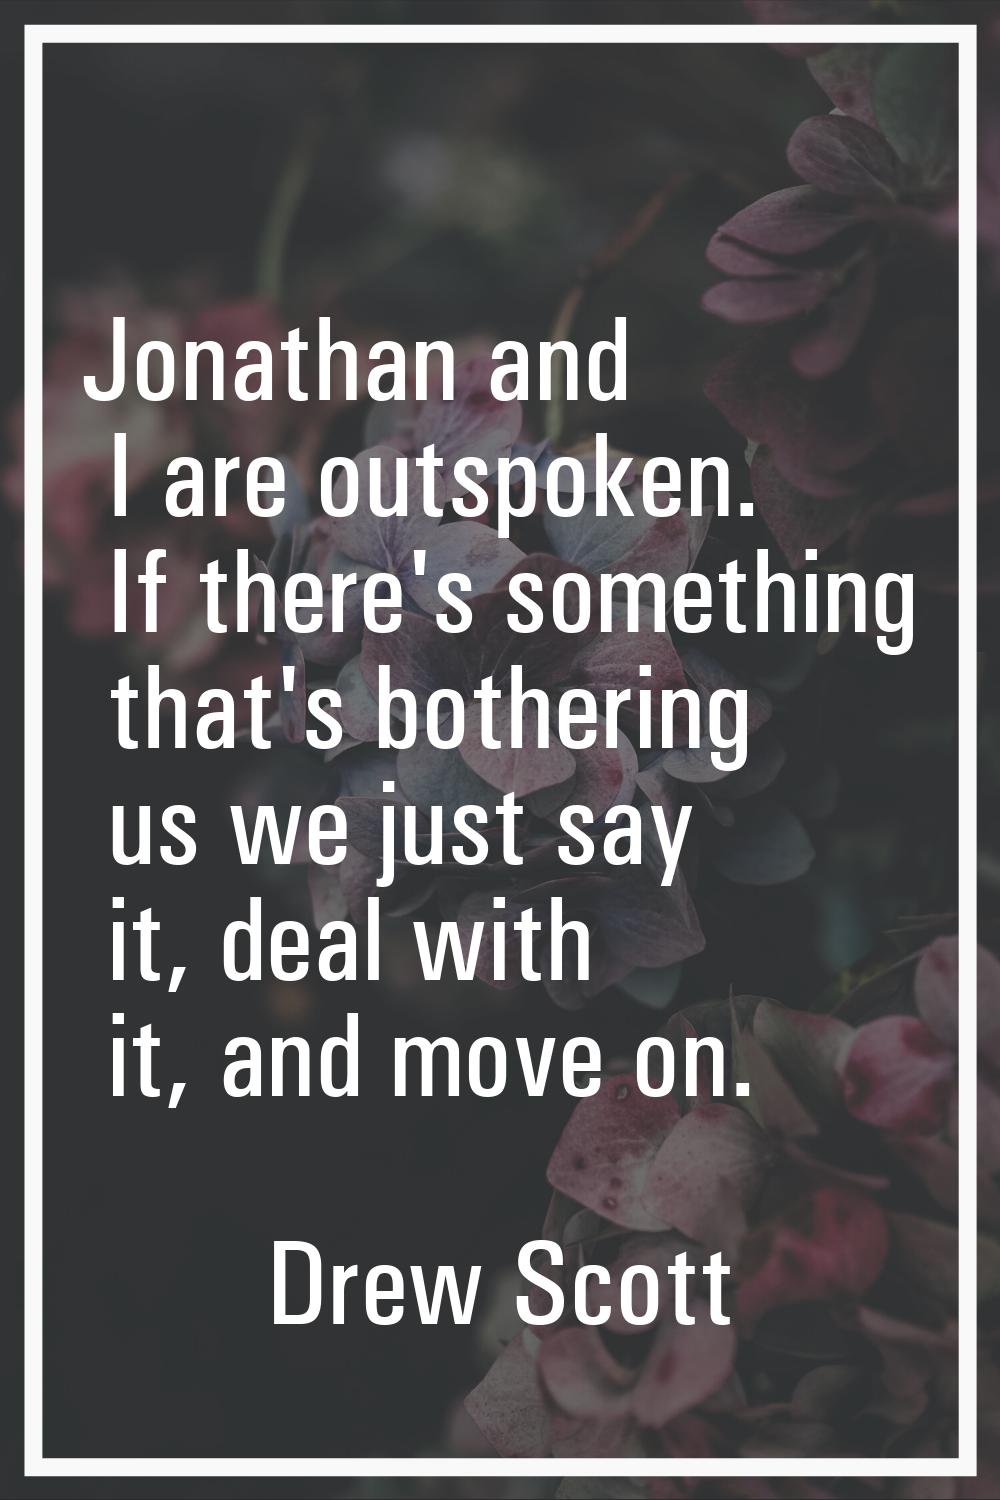 Jonathan and I are outspoken. If there's something that's bothering us we just say it, deal with it